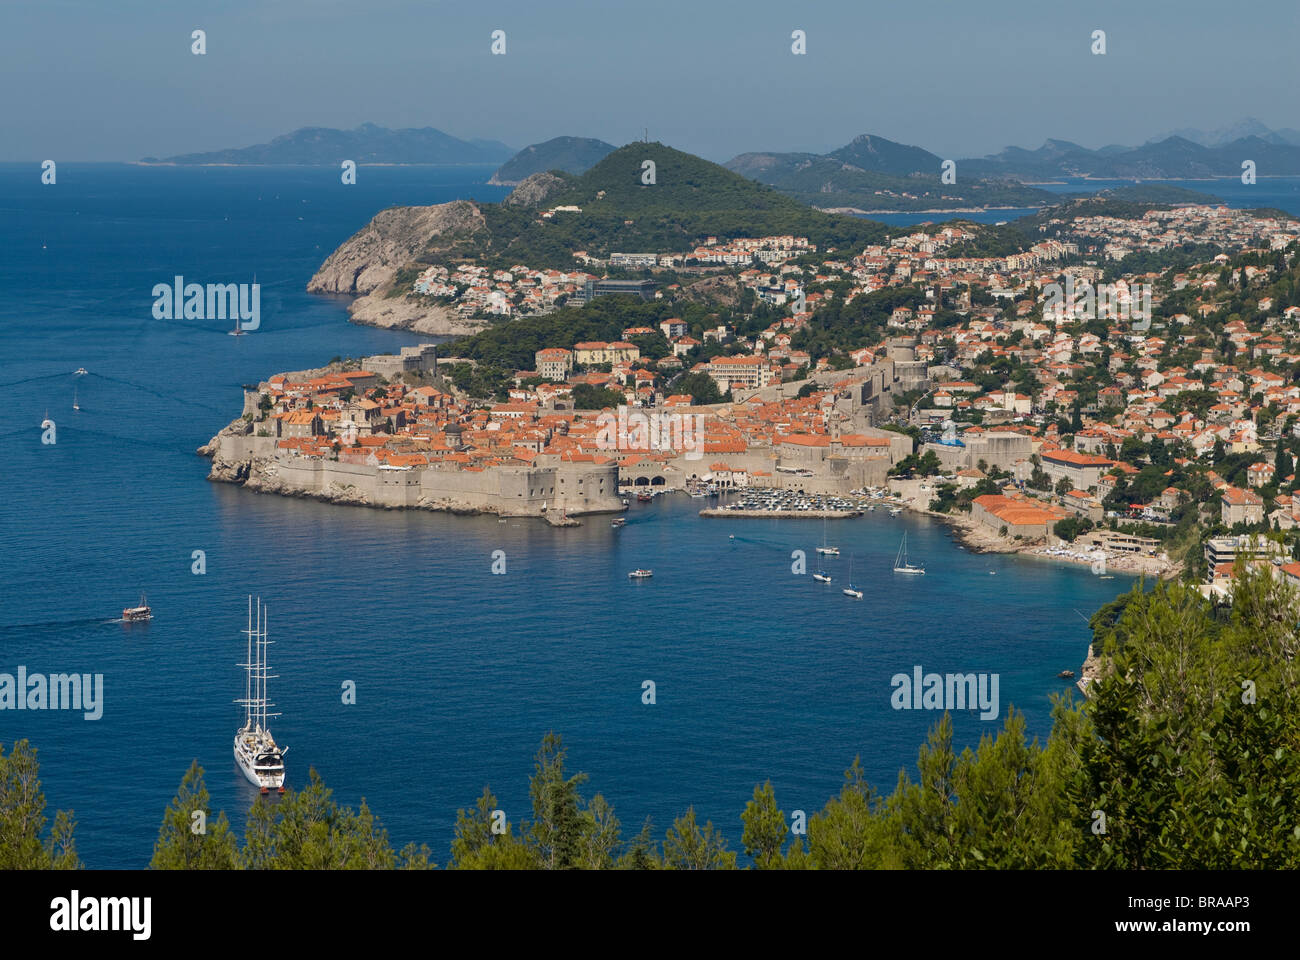 View over the old town of Dubrovnik, UNESCO World Heritage Site, Croatia, Europe Stock Photo